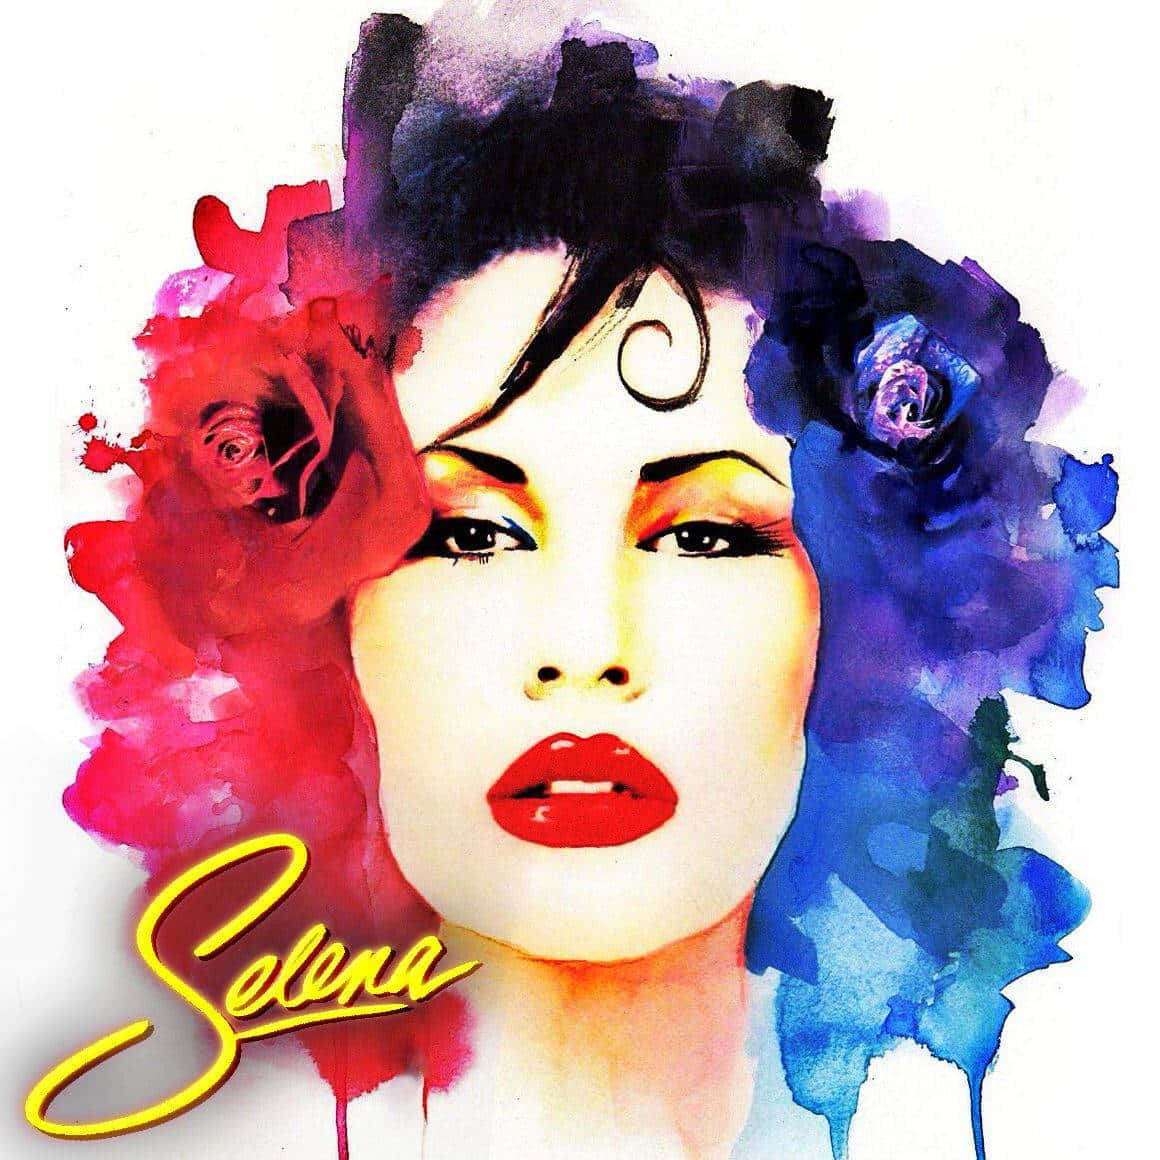 Be inspired by the Queen of Tejano Music, Selena Quintanilla Wallpaper